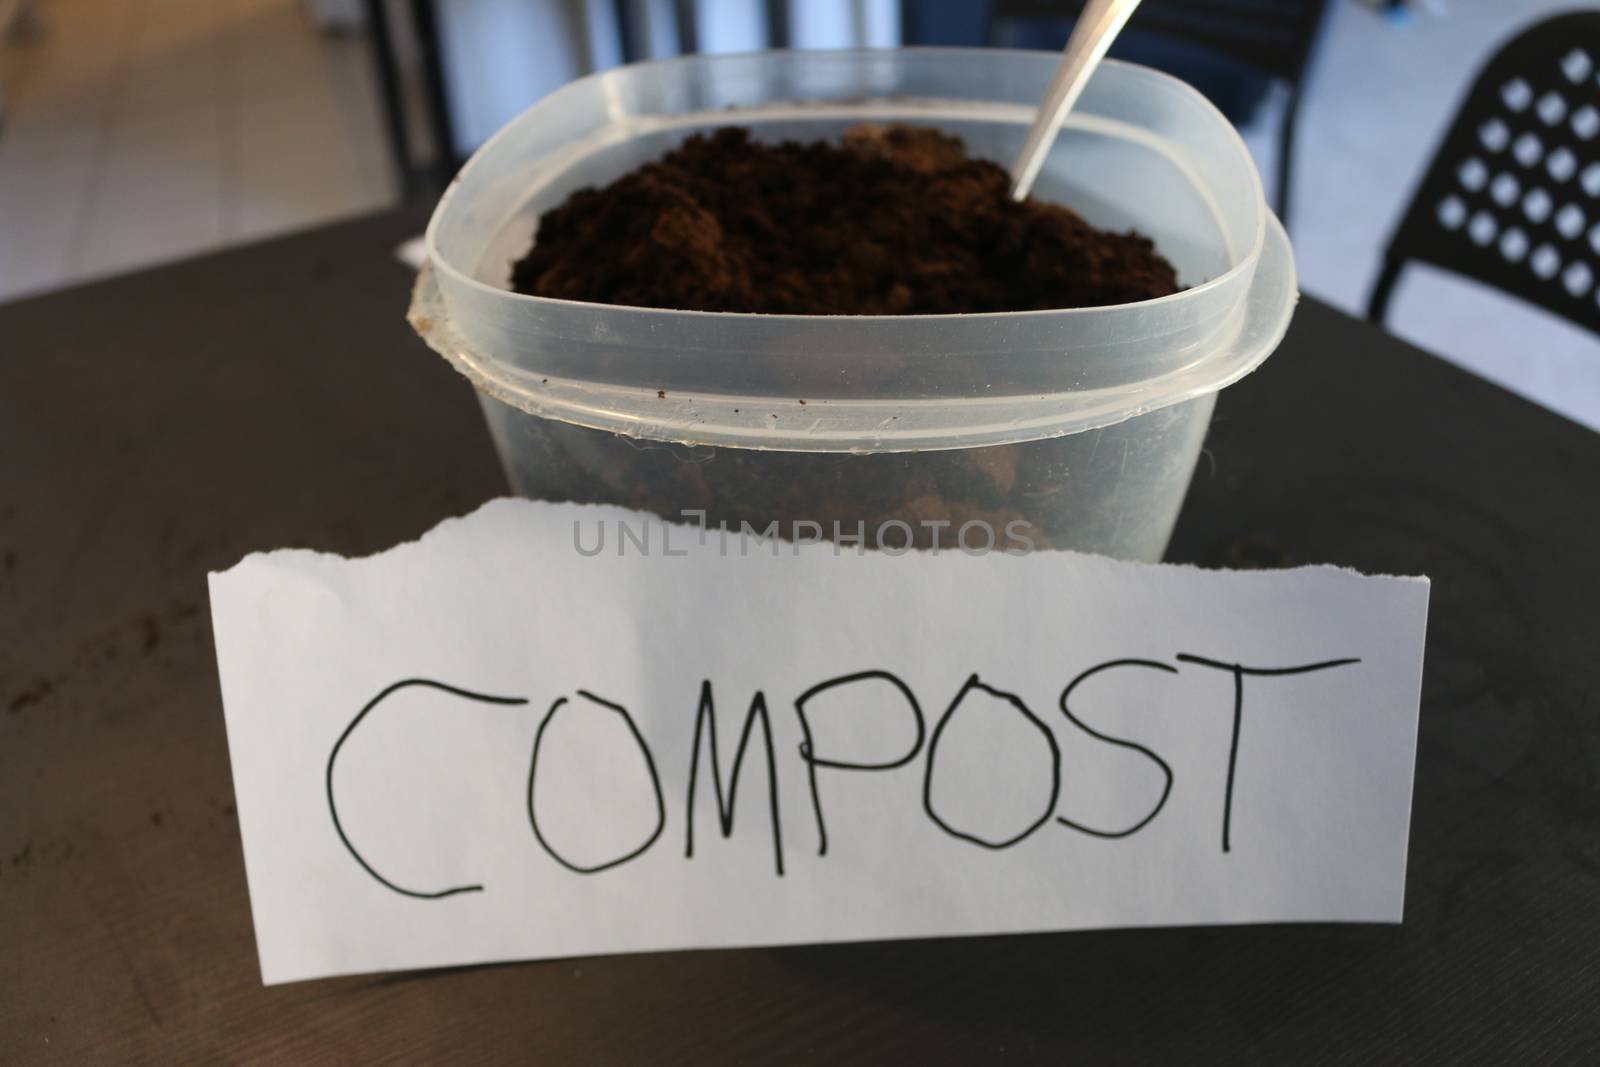 Photo of a container of used coffee grounds with a sign that says compost by mynewturtle1